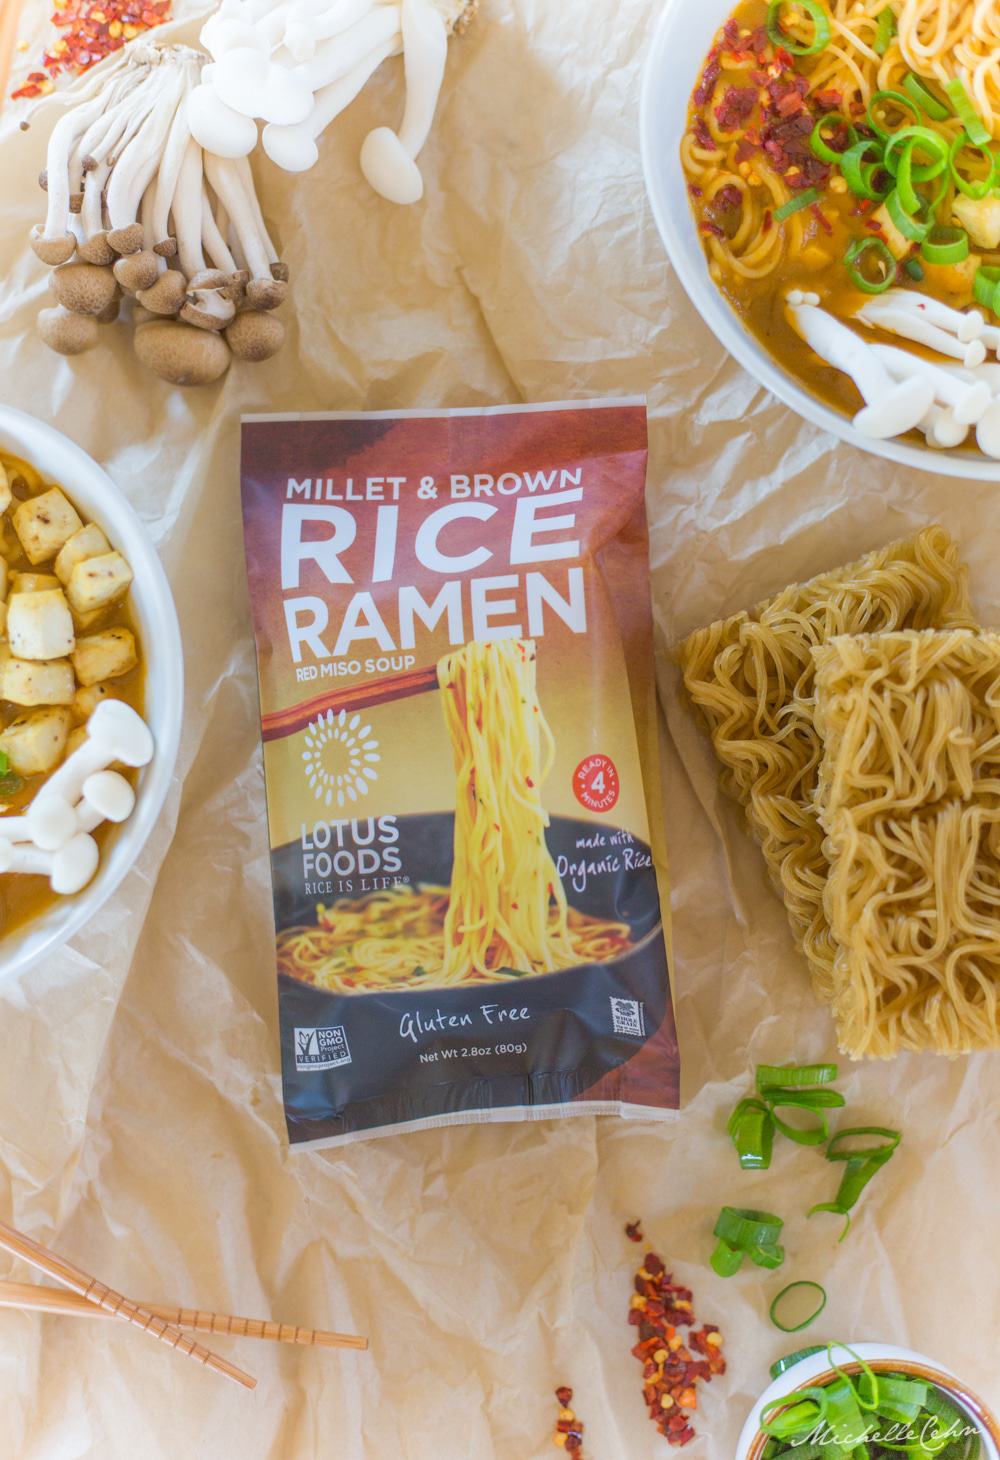 A package of gluten-free rice ramen made from Millet and Brown Rice from Lotus Foods. 